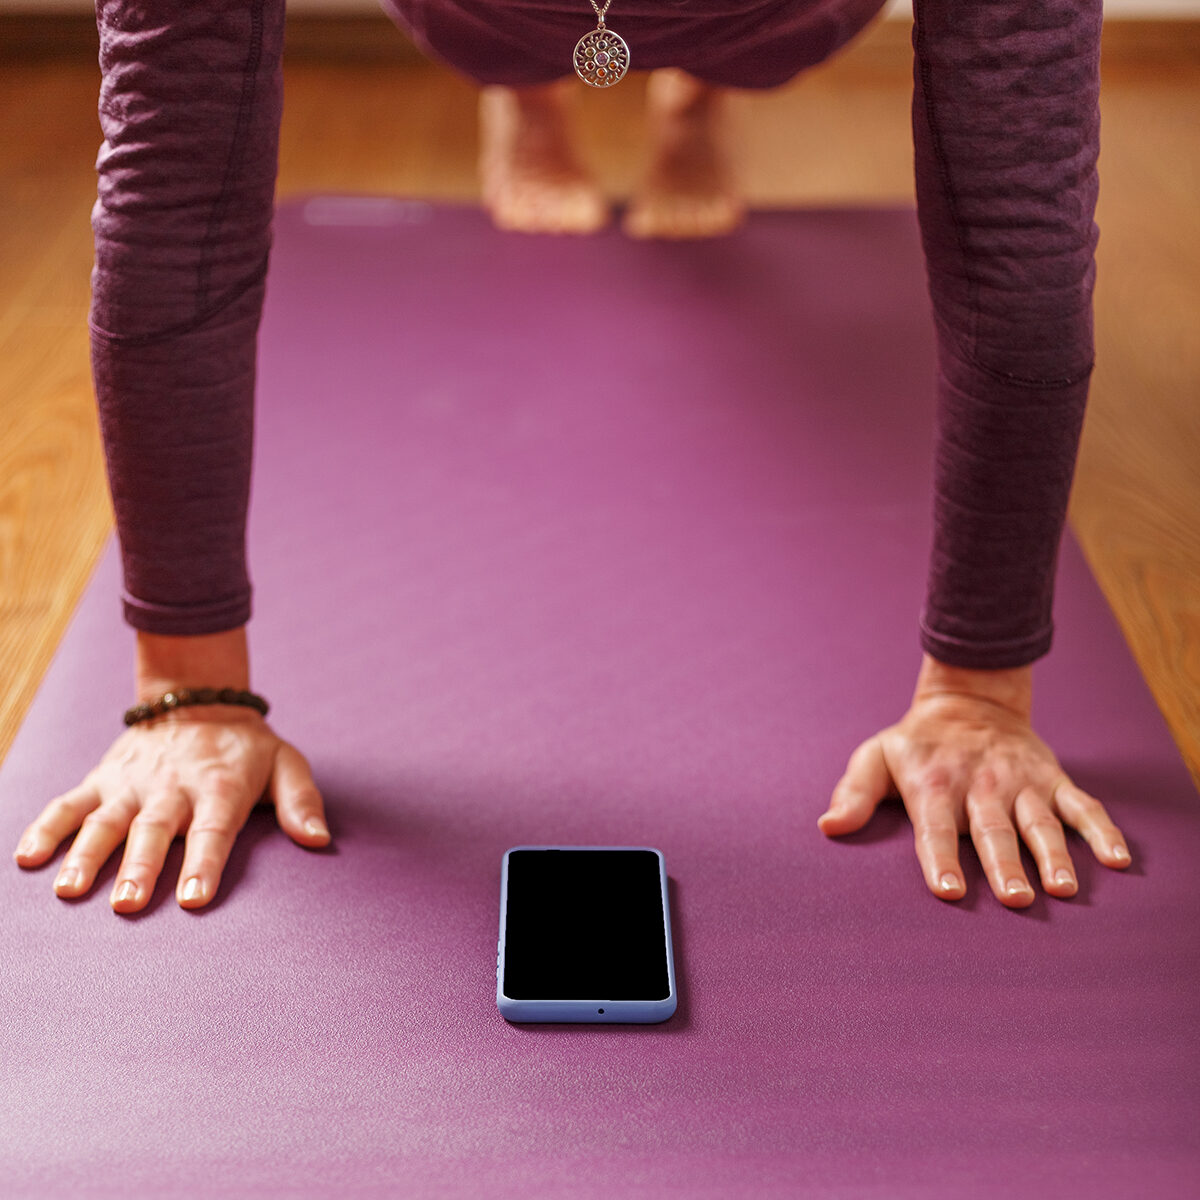 Yoga online training workout by smartphone, using the fitness app at home in the gym. Online yoga and meditation practices. Place on the smartphone screen